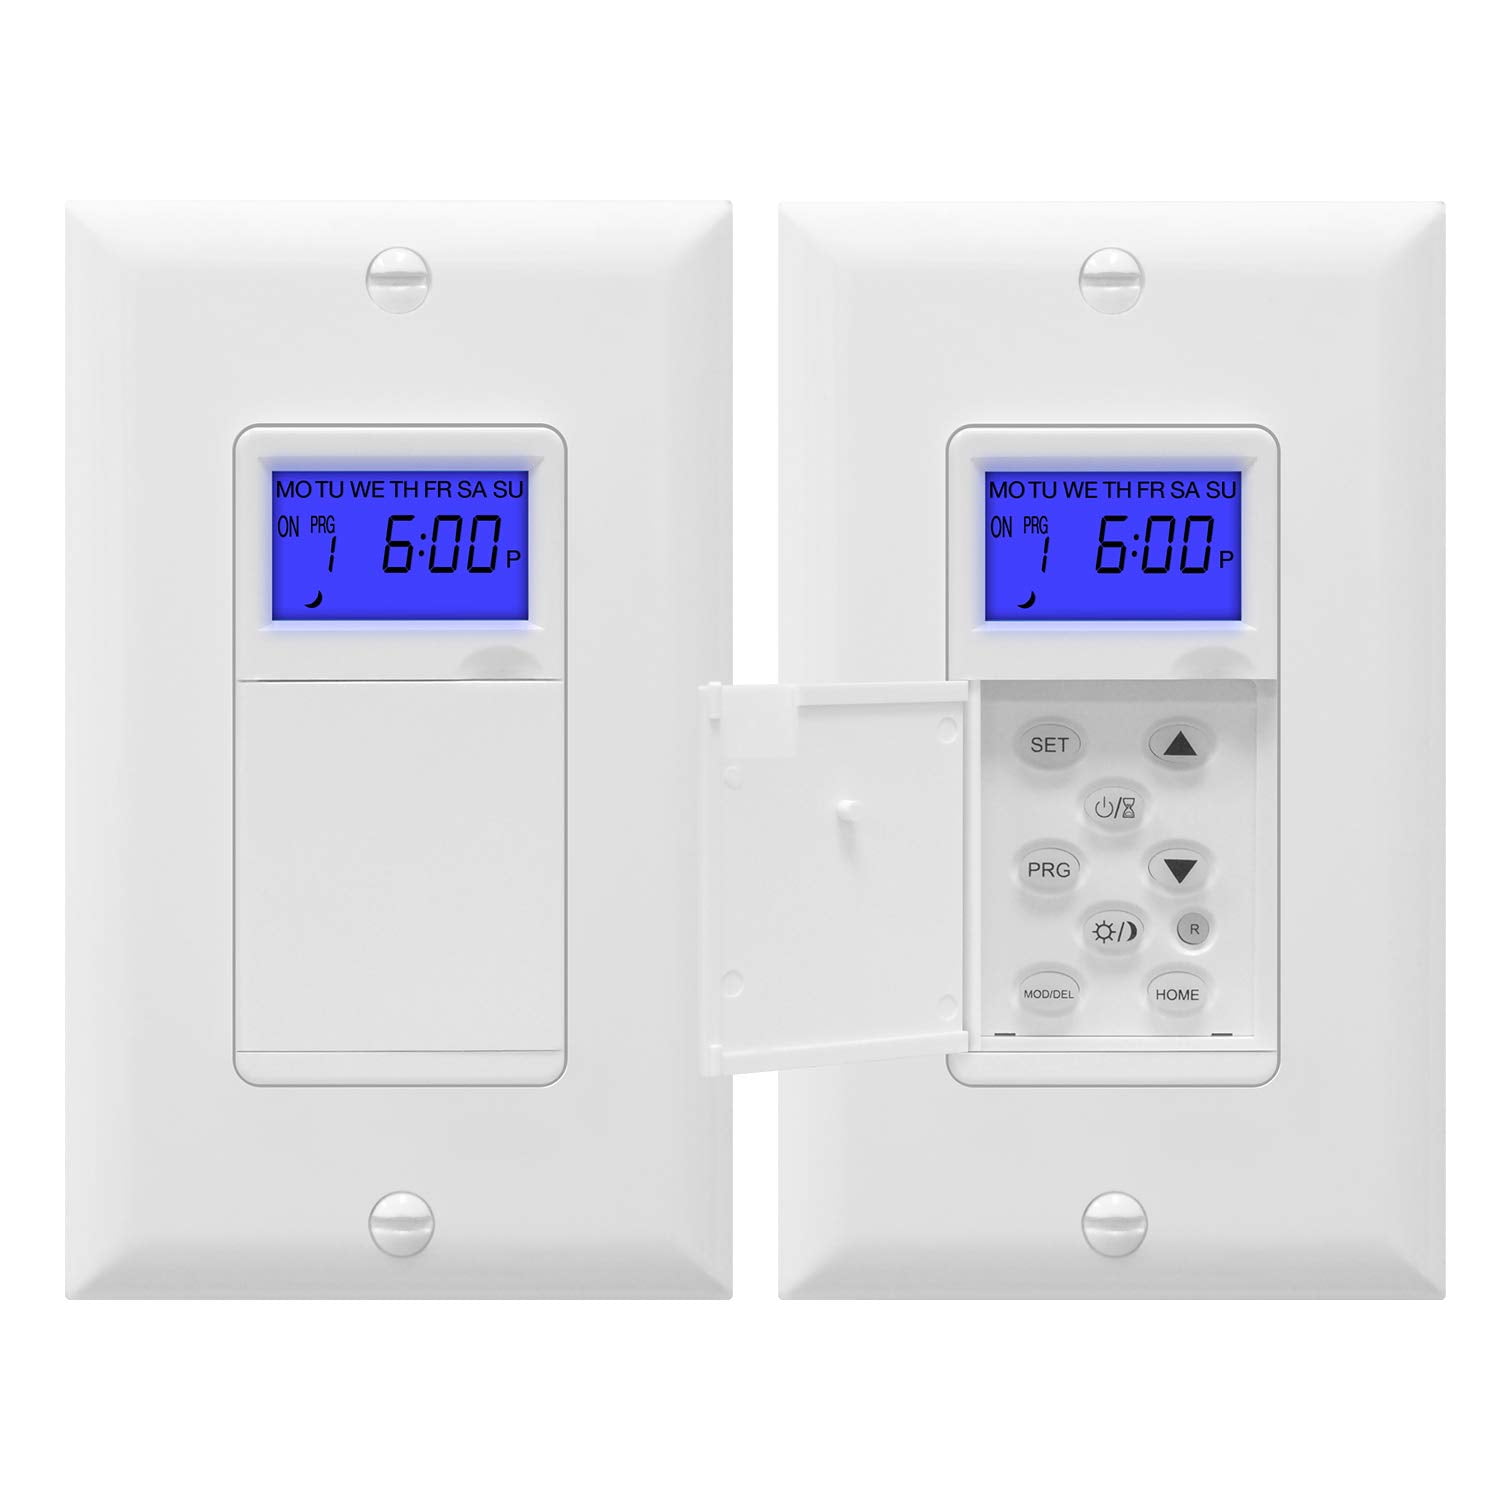 TGT01-H, Programmable Wall for UL Motors, Required, Astronomic Single-Pole White, Neutral Lights, Wire Listed, Switch, or 7-Day in Sunrise and Fans, Timer Digital TOPGREENER 2 timer Sunset 3-Way, Pack